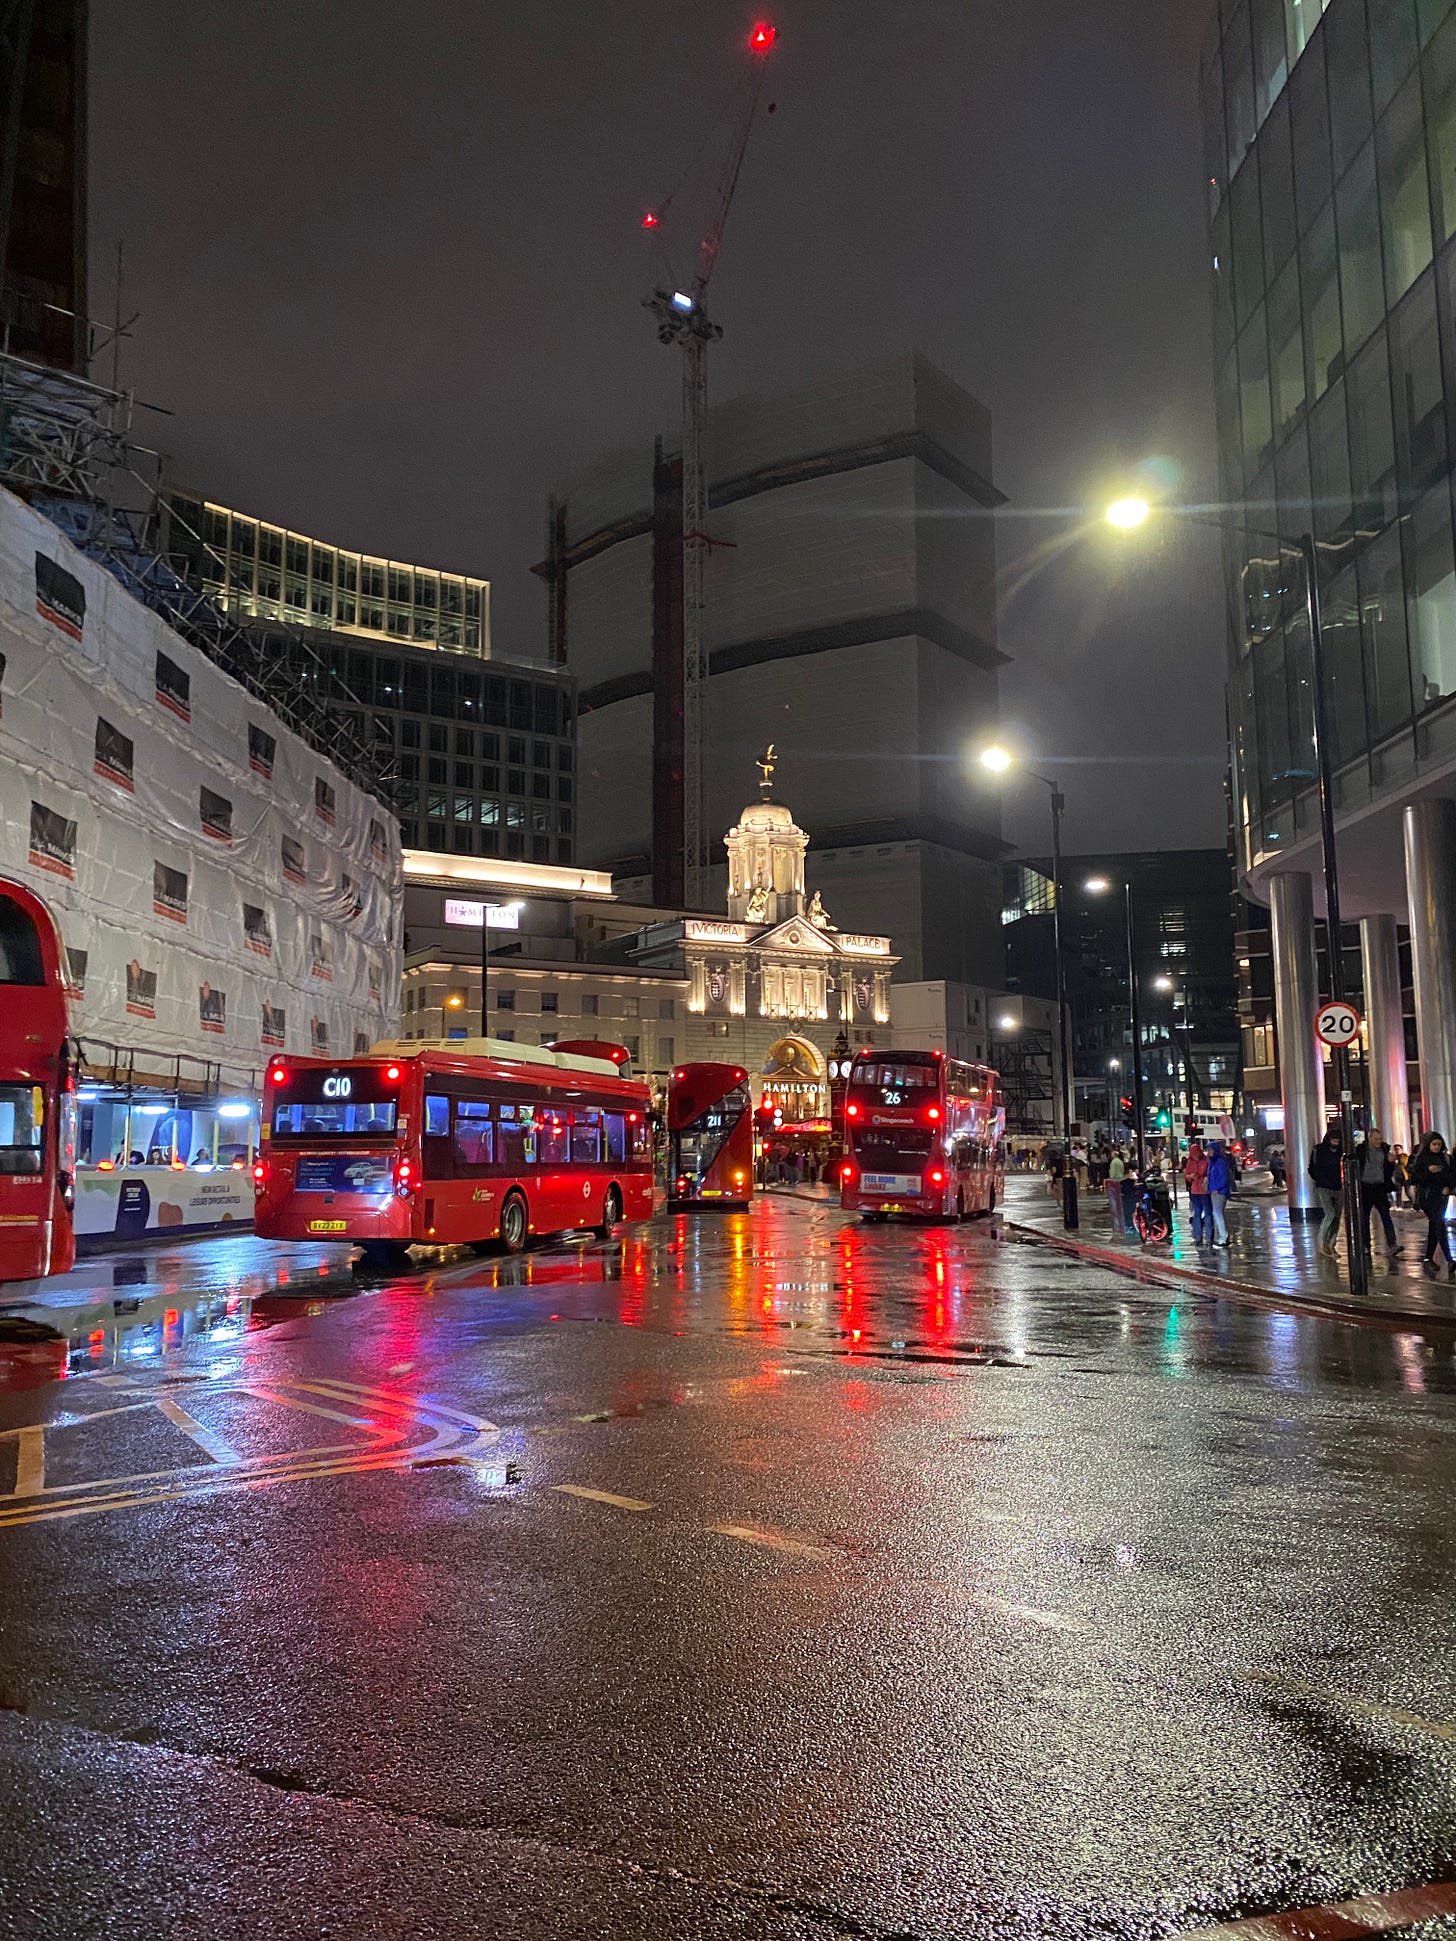 a theatre building lit up in white against a charcoal sky with red busses in a rainy street in the foreground